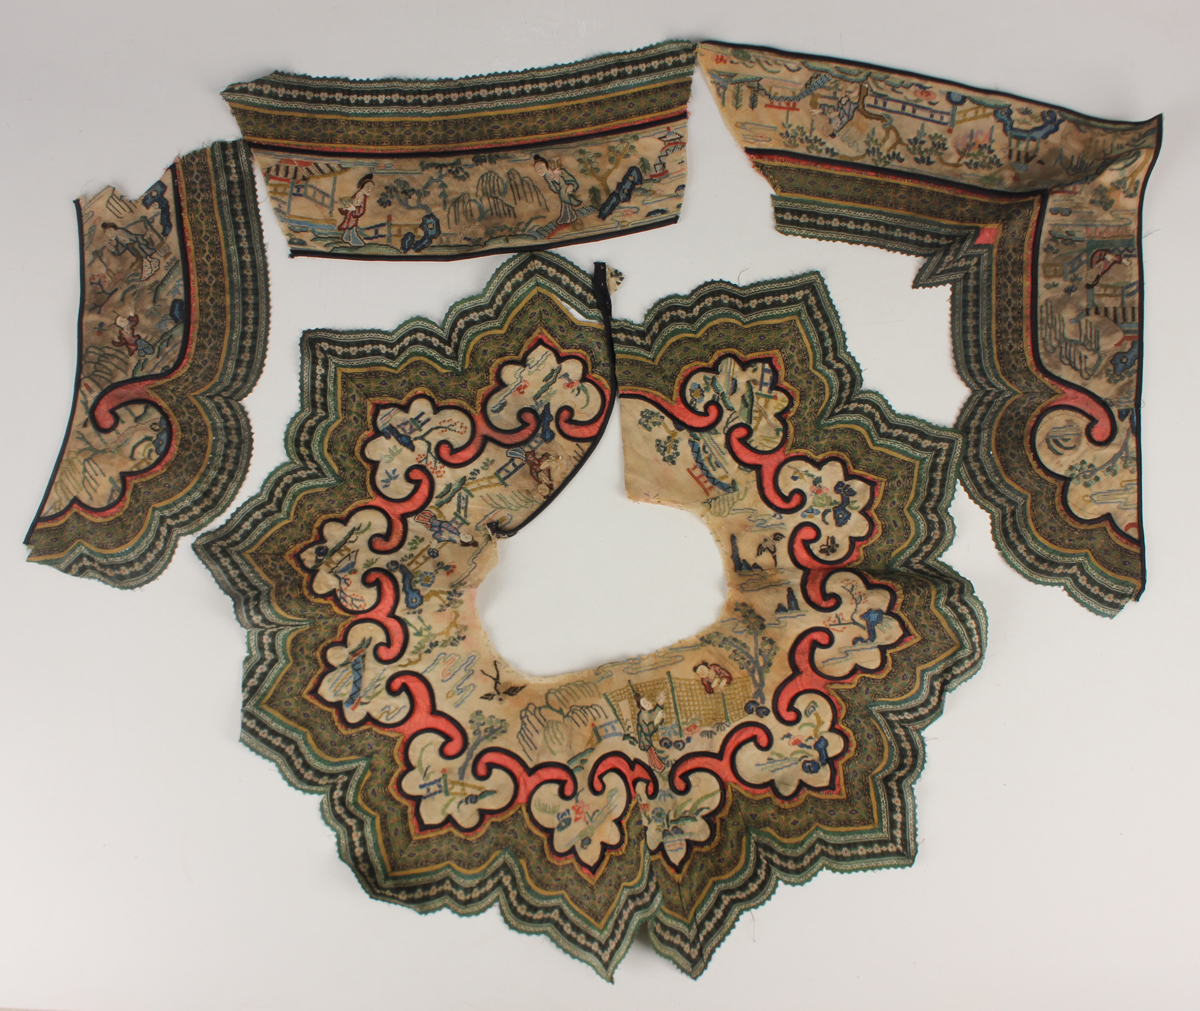 A small collection of Chinese export silkwork, late Qing dynasty, including a collar, decorated with